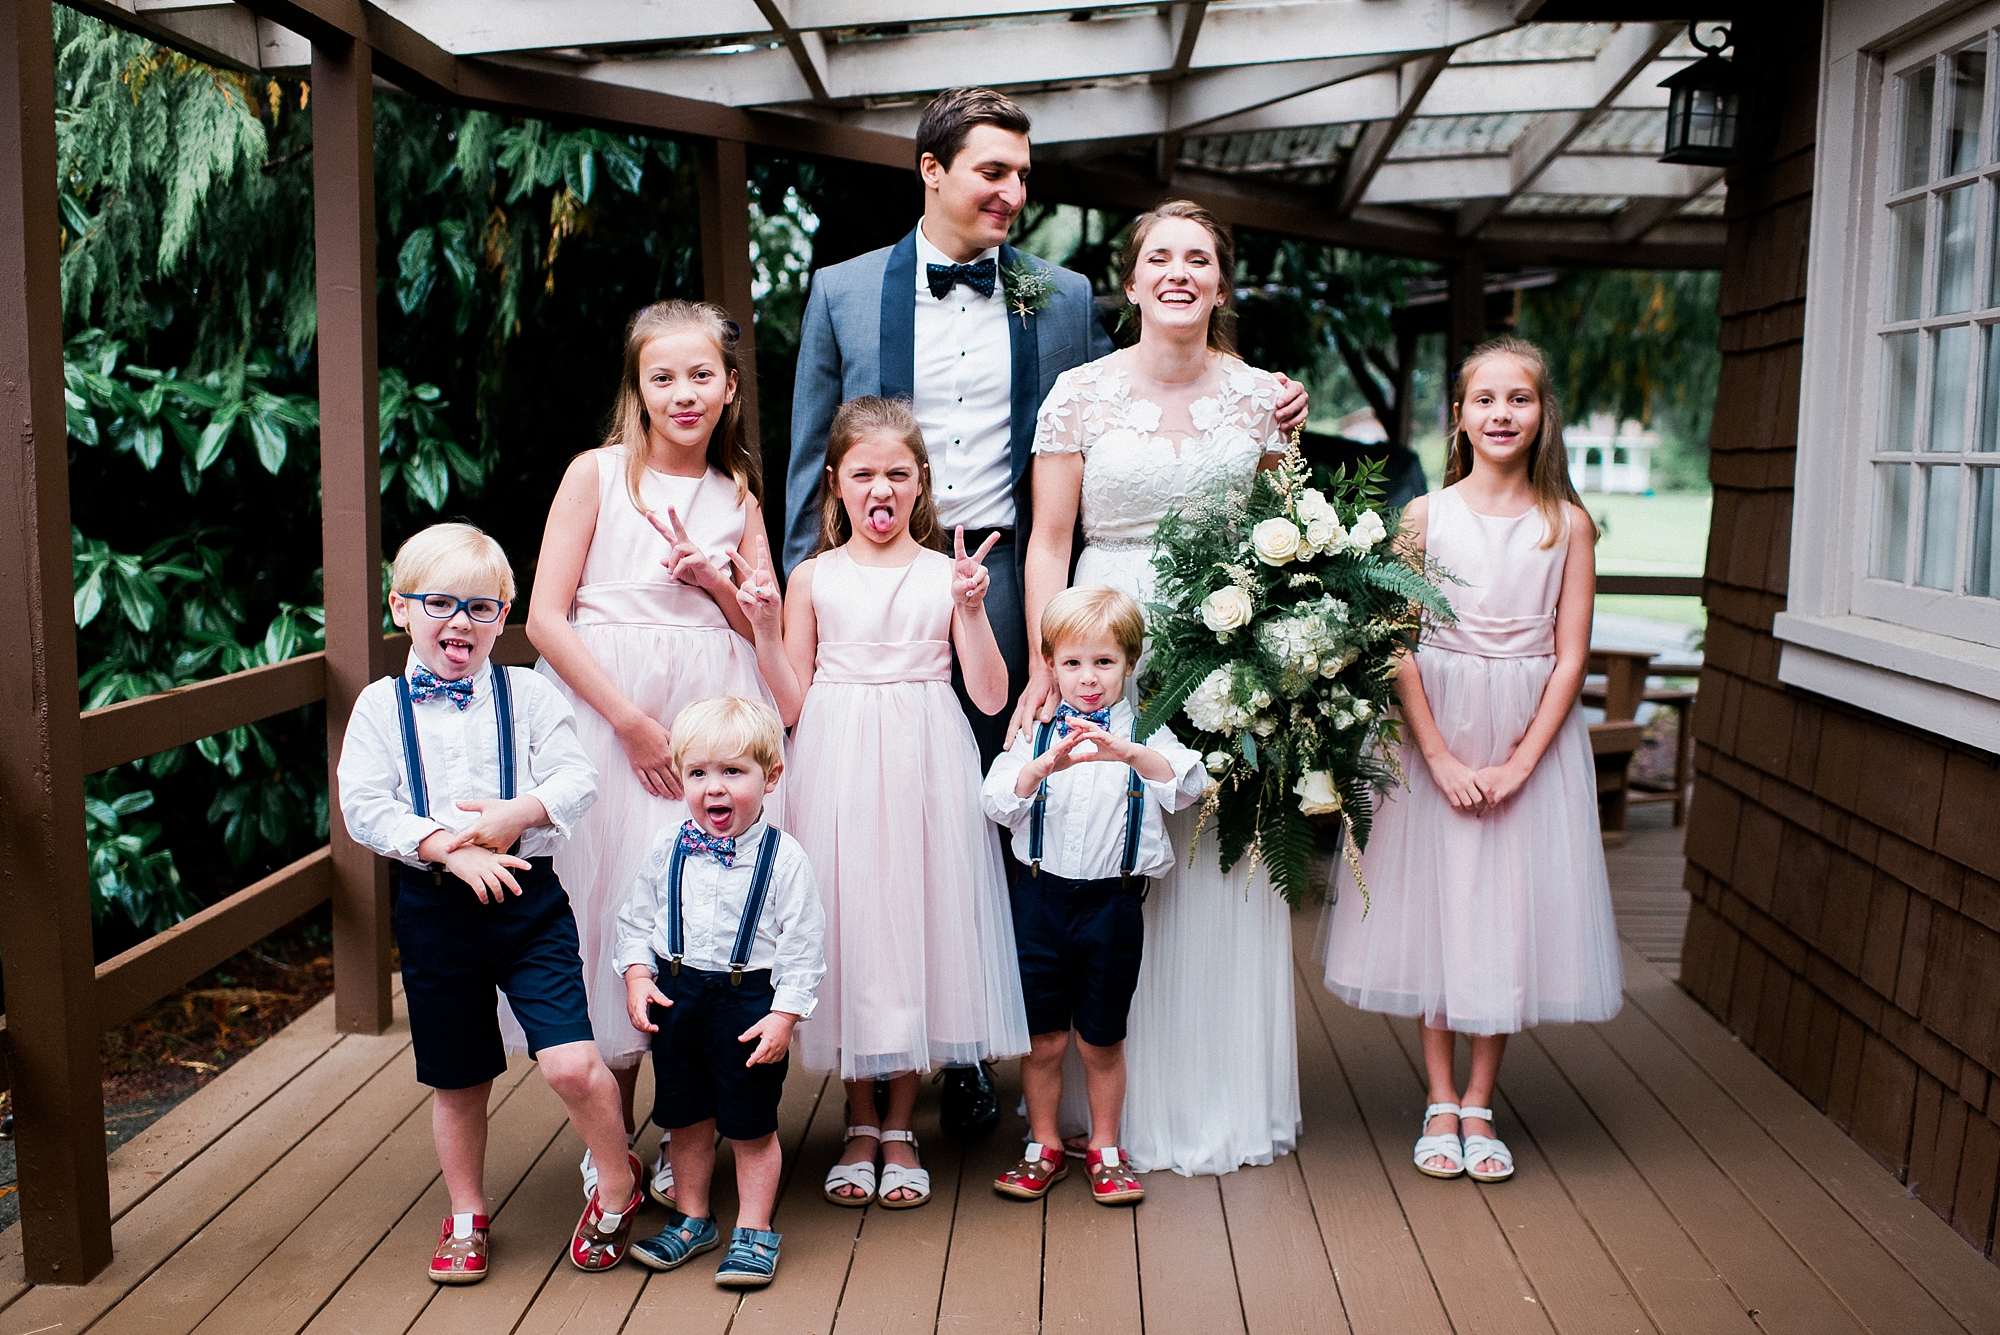 Lake Quinault Lodge Flowergirls and Ringbearers